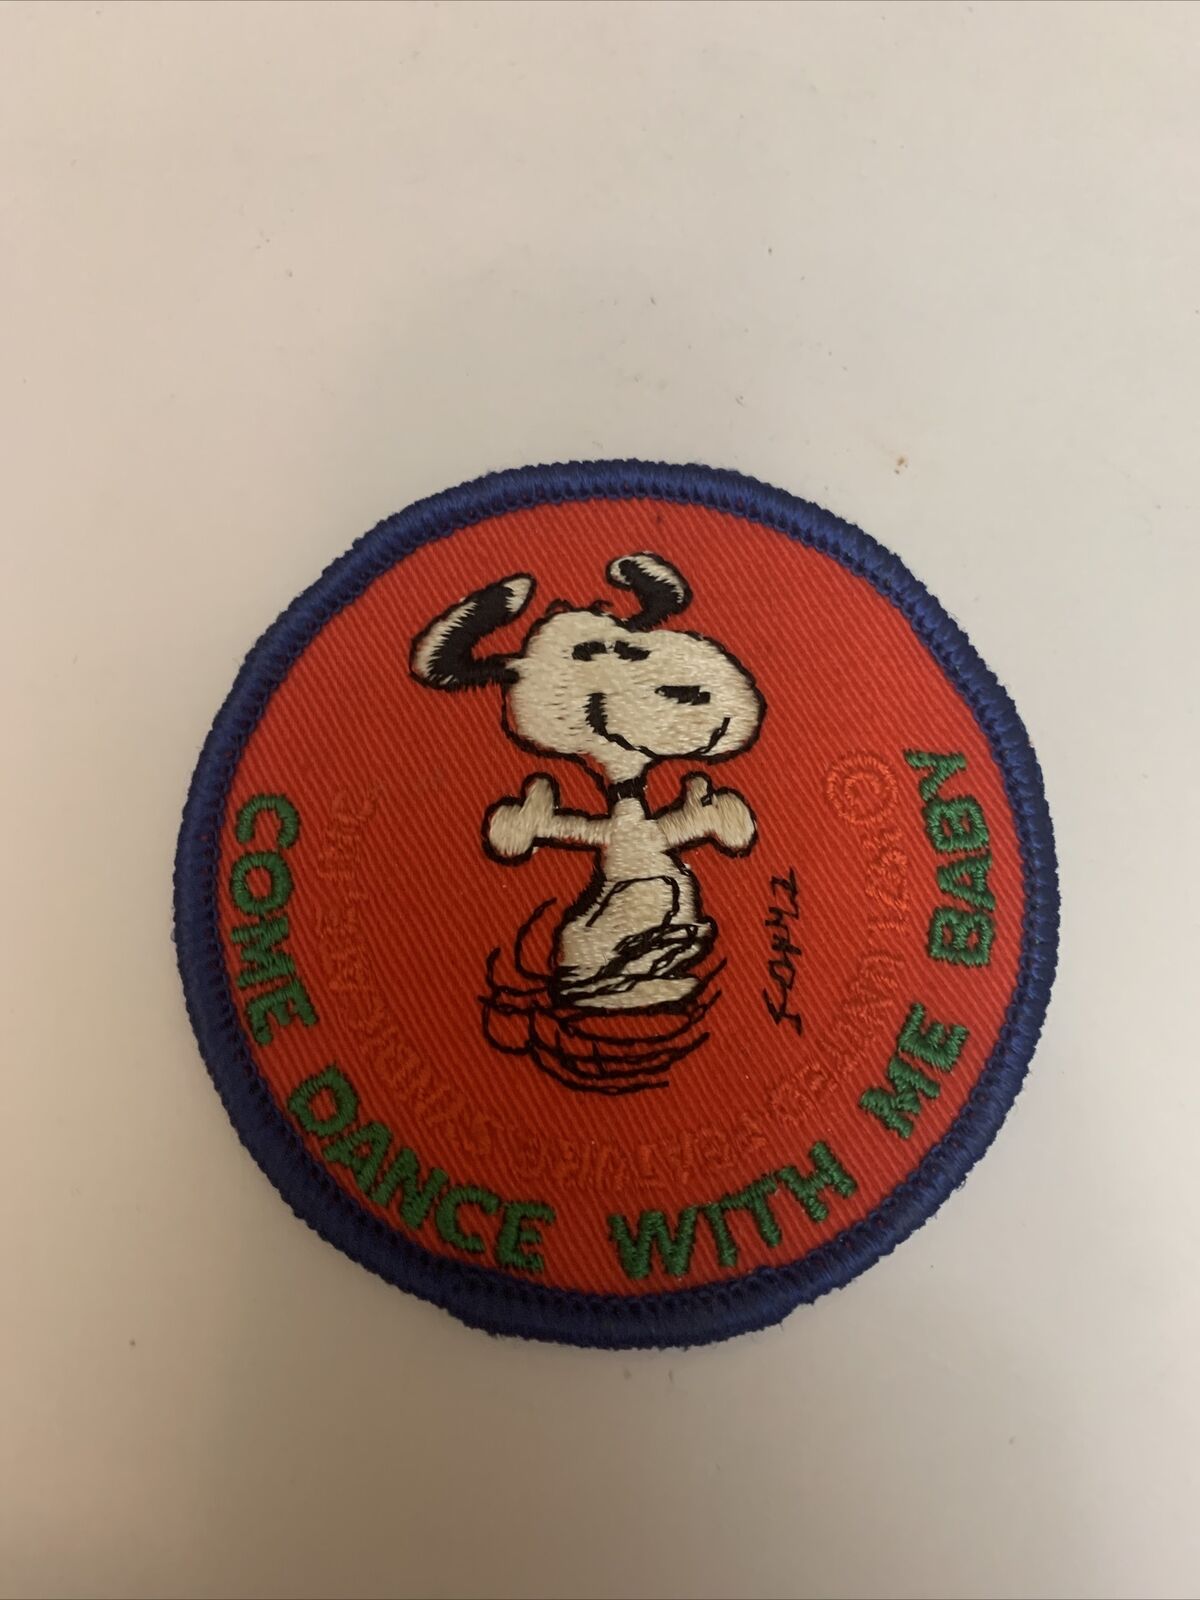 Vintage 1971 SNOOPY PATCH. COME DANCE WITH ME BABY. NEW VINTAGE SNOOPY PATCH.